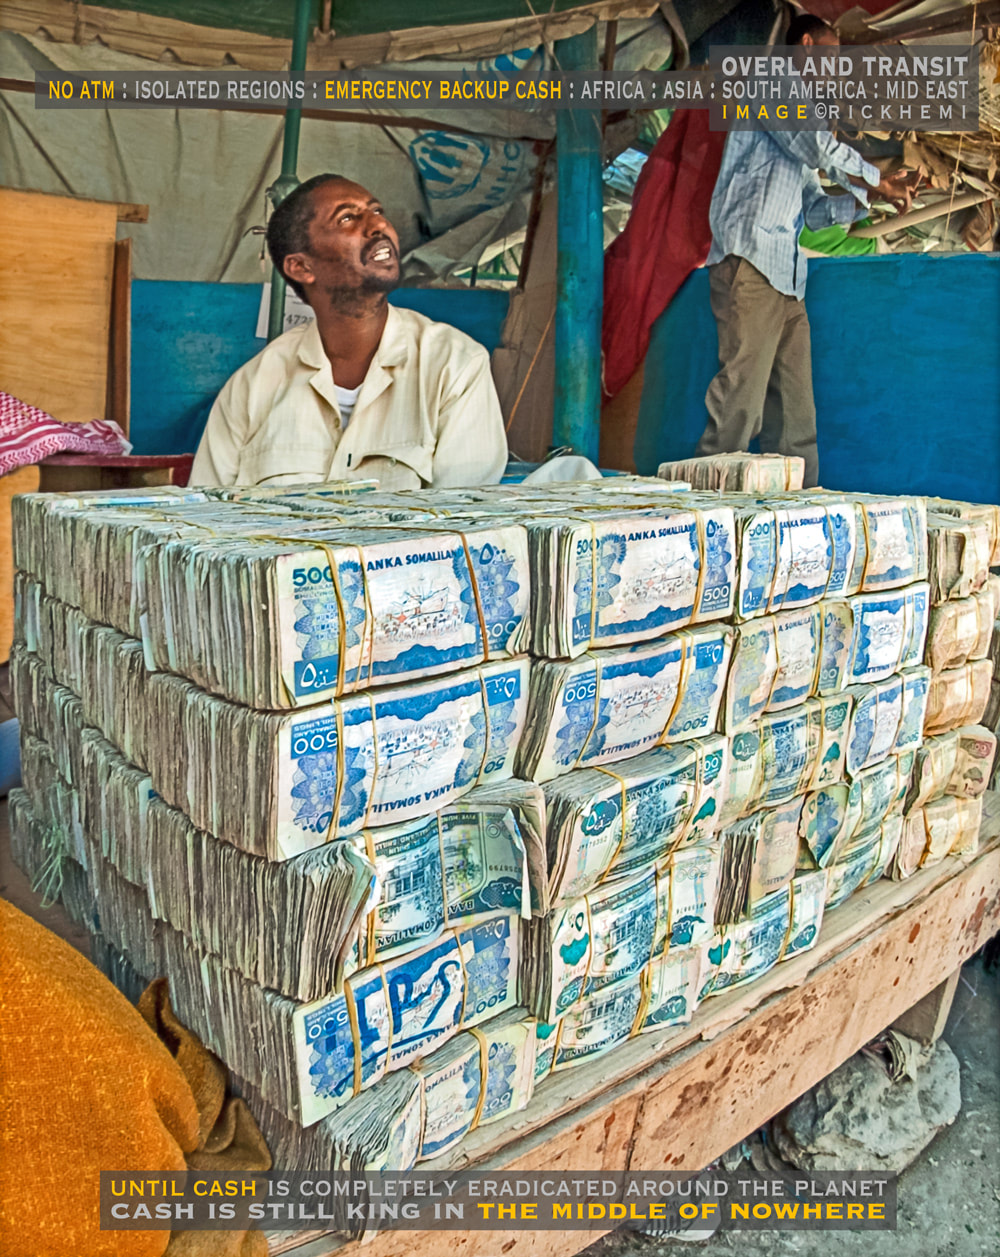 solo overland travel, solo overland transit, cash money backup supply, isolated regions, emergency cash stash, Africa, Asia, Middle East, South America, image by Rick Hemi